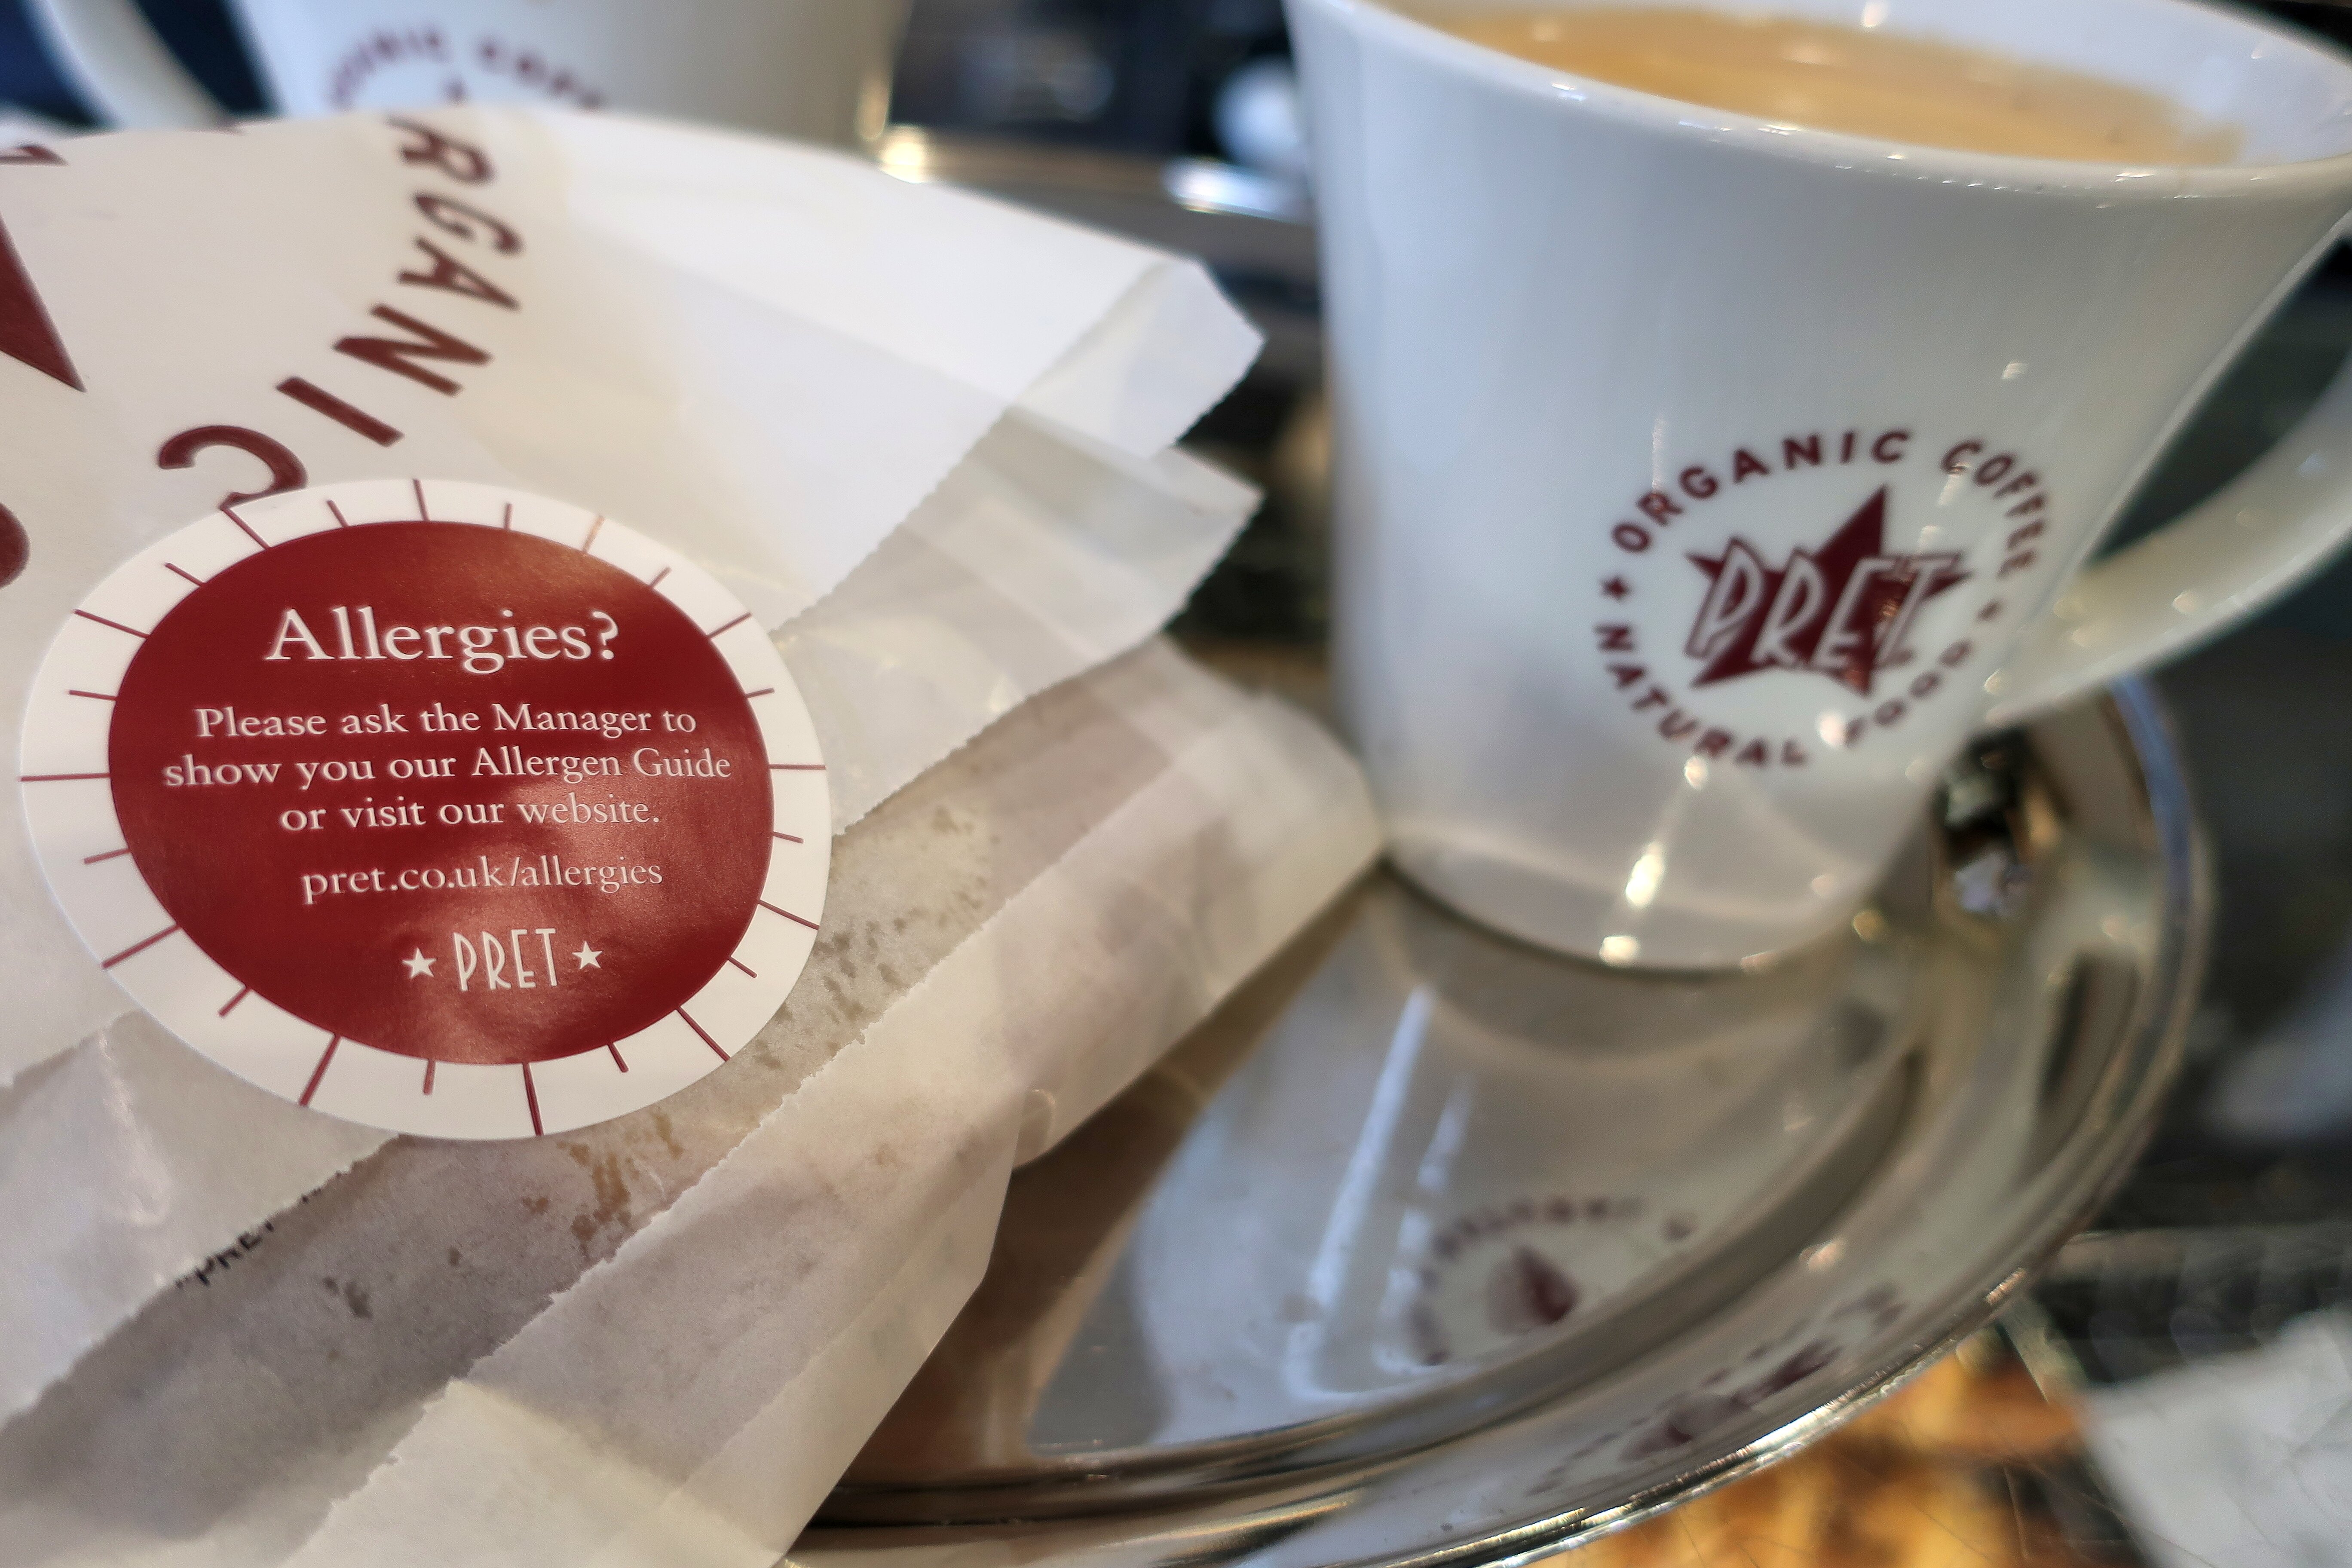 Pret A Manger denies food safety offence after student suffers allergic reaction